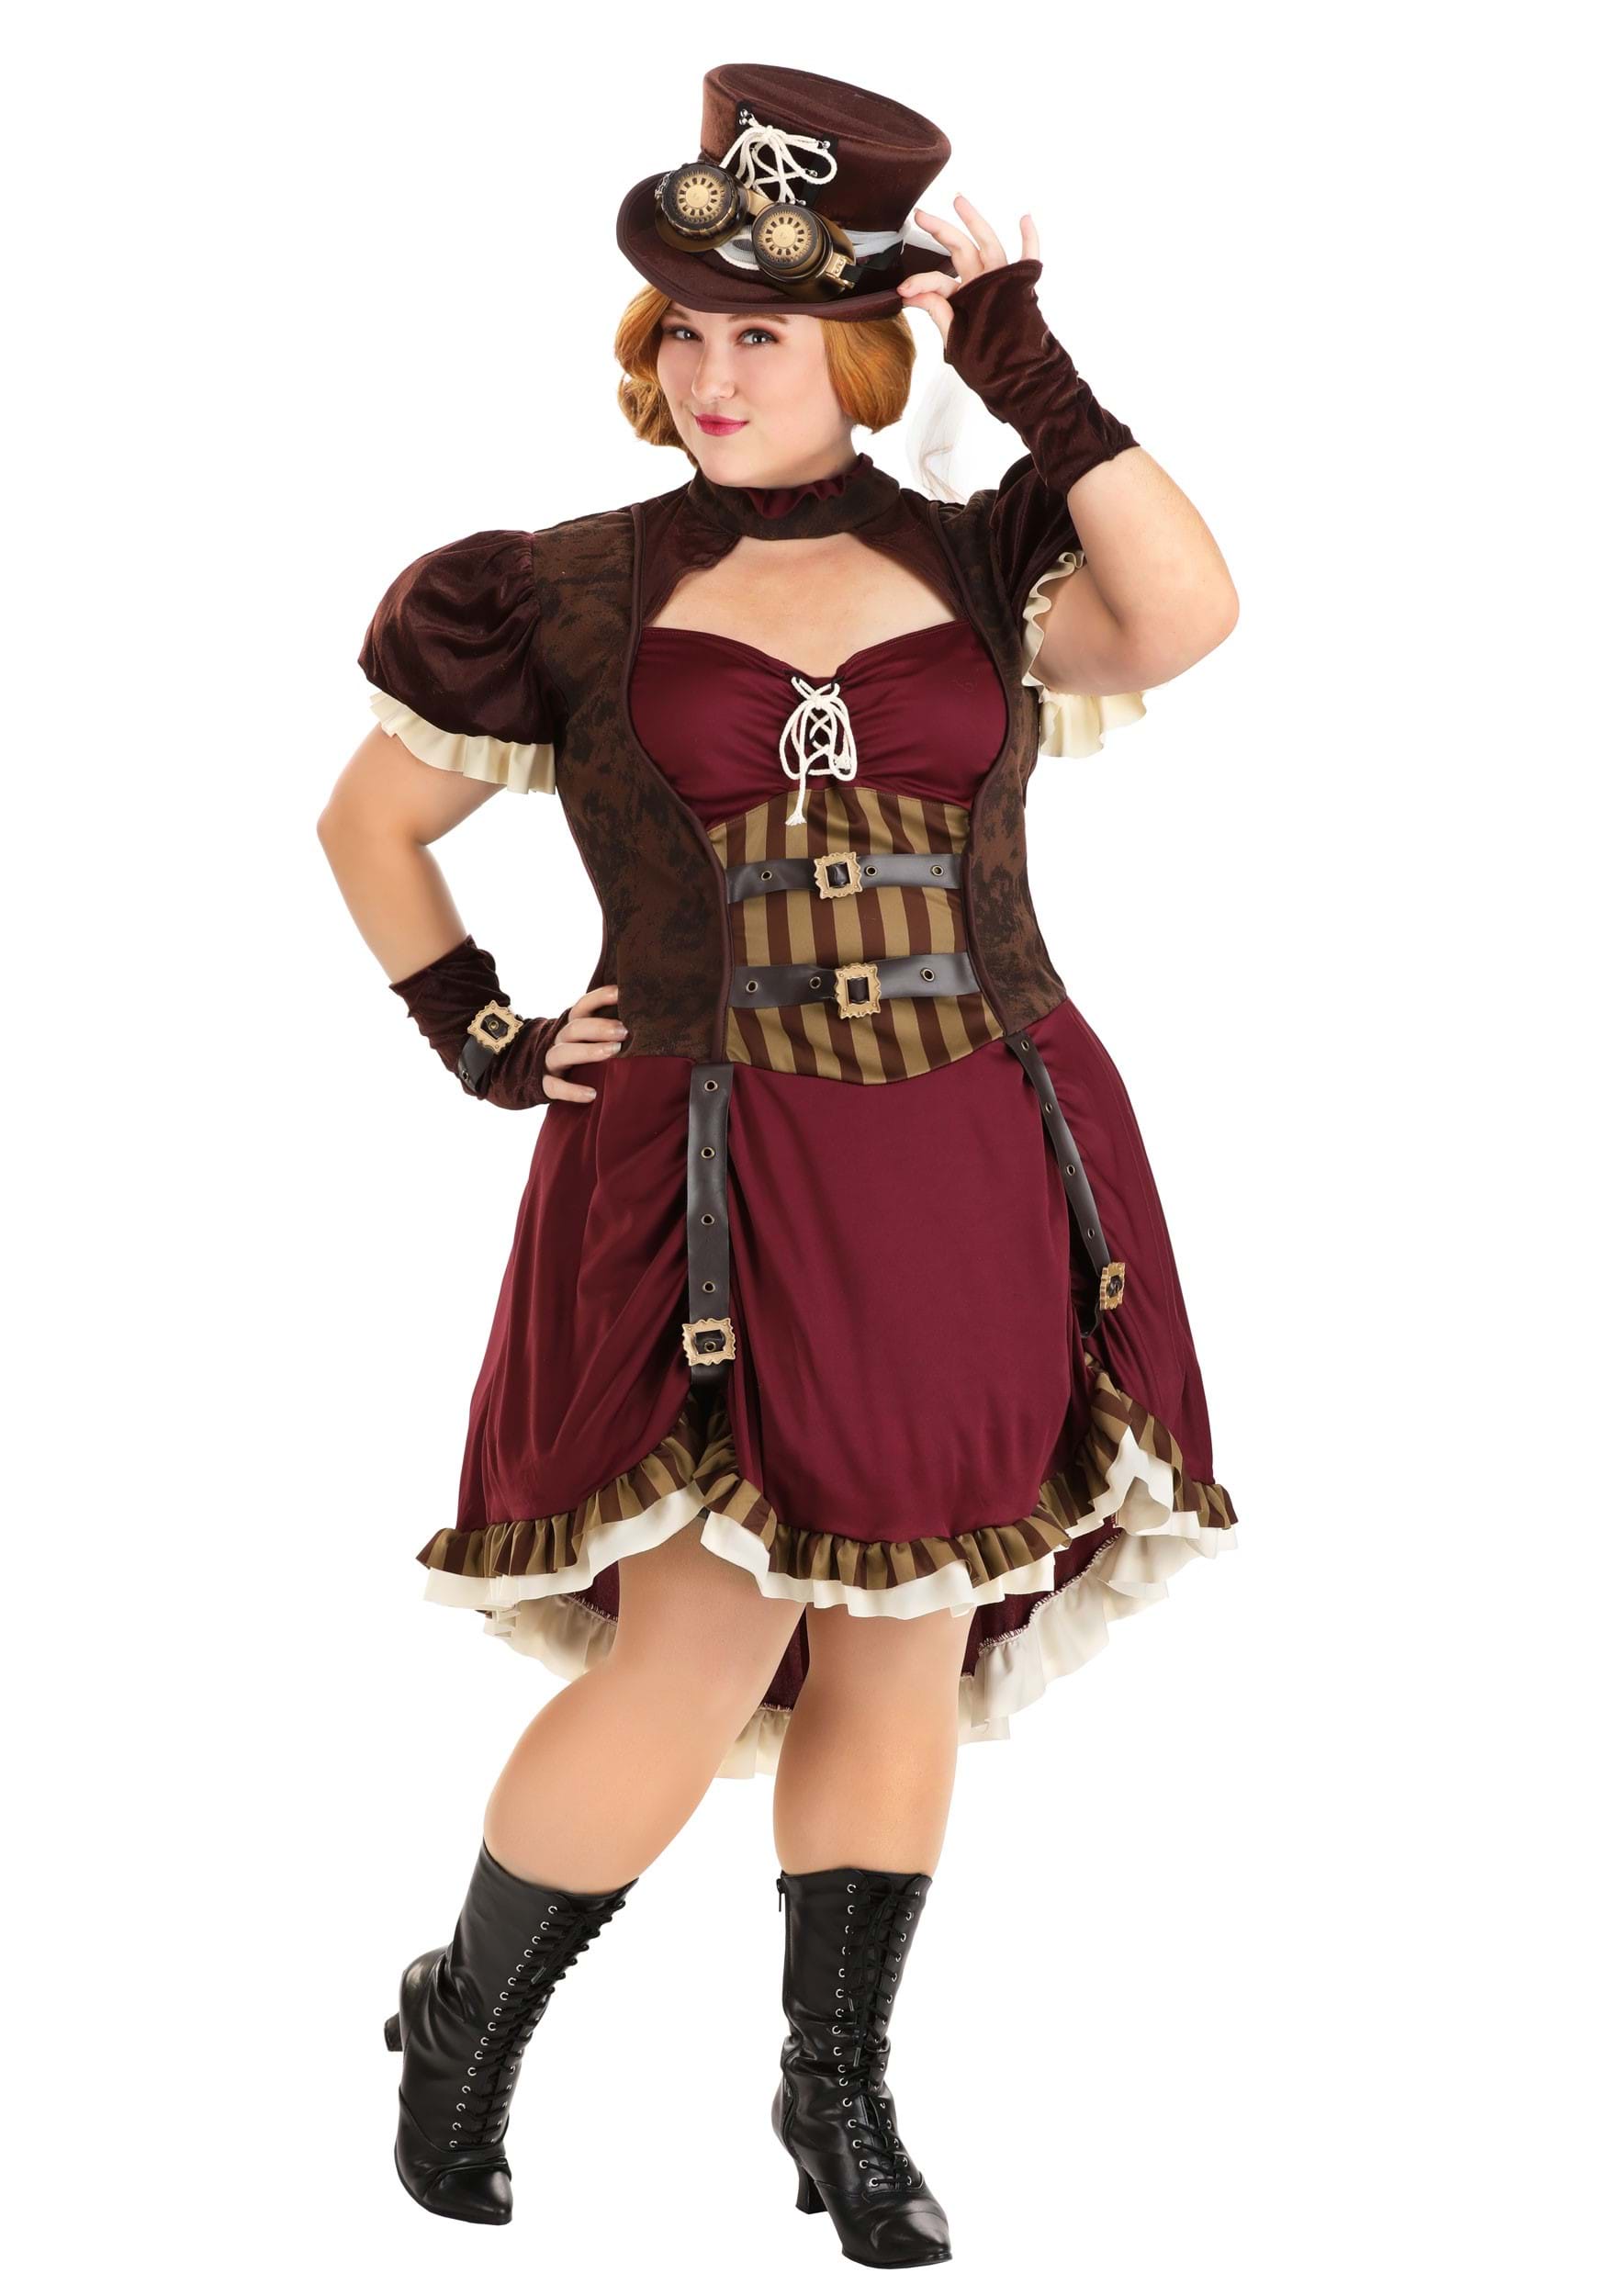 California Costume Collections Women's Plus Size Steampunk Lady Costume, Size 1X, Moccaccino/Orchid